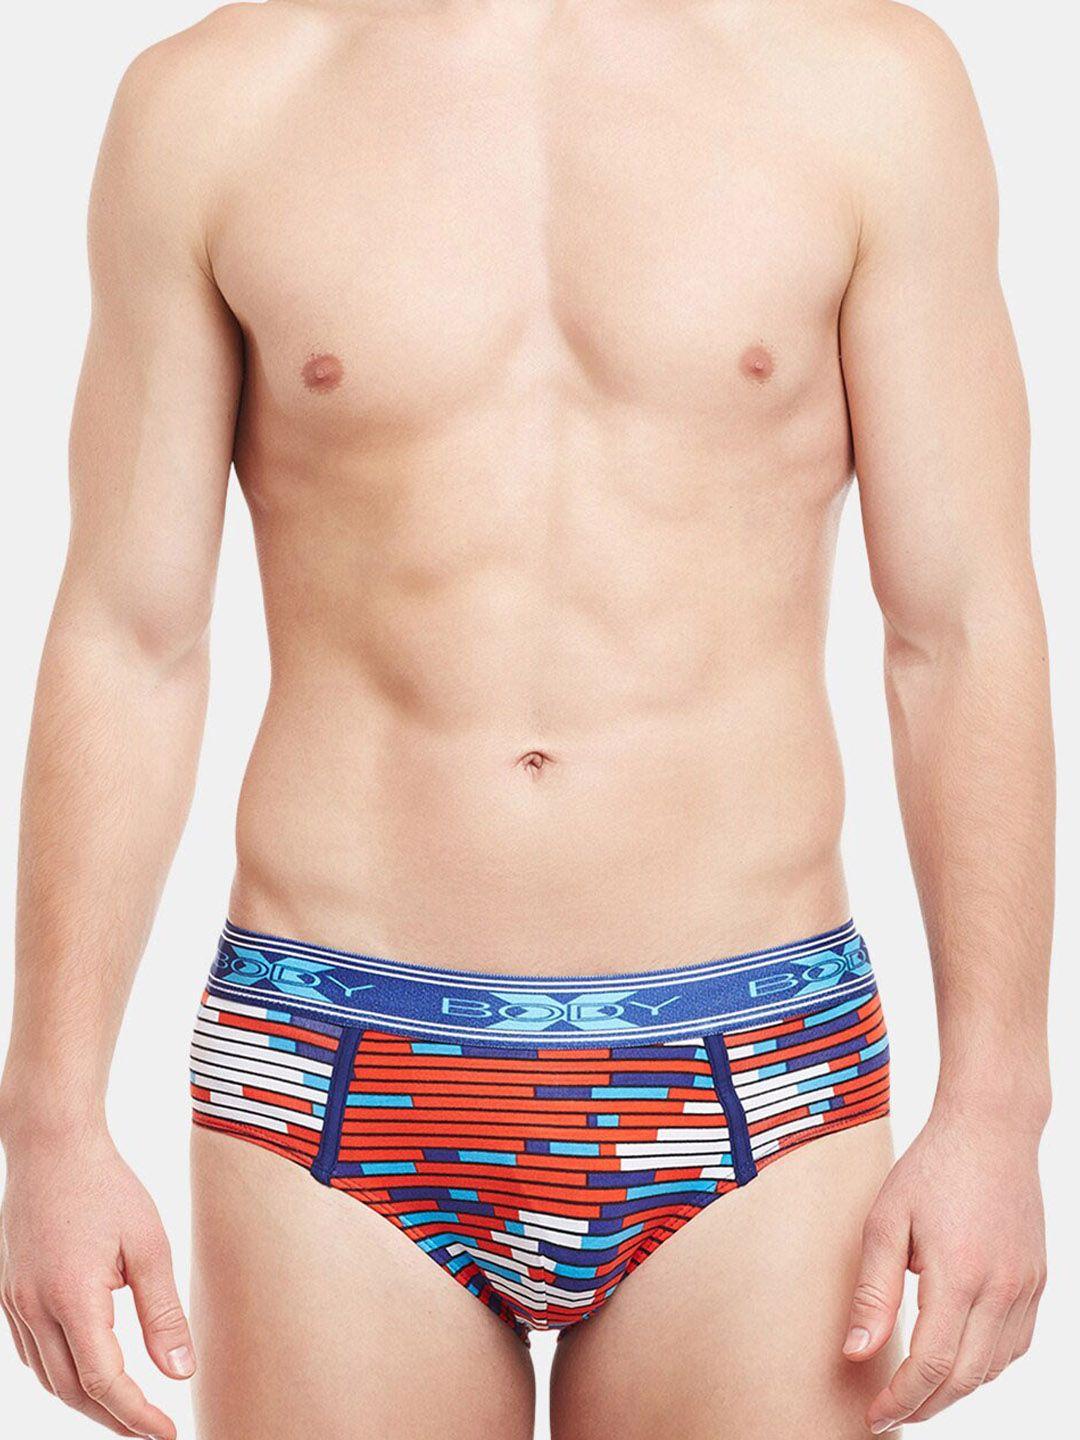 bodyx-abstract-printed-hipster-brief-bx01b-print-3-s